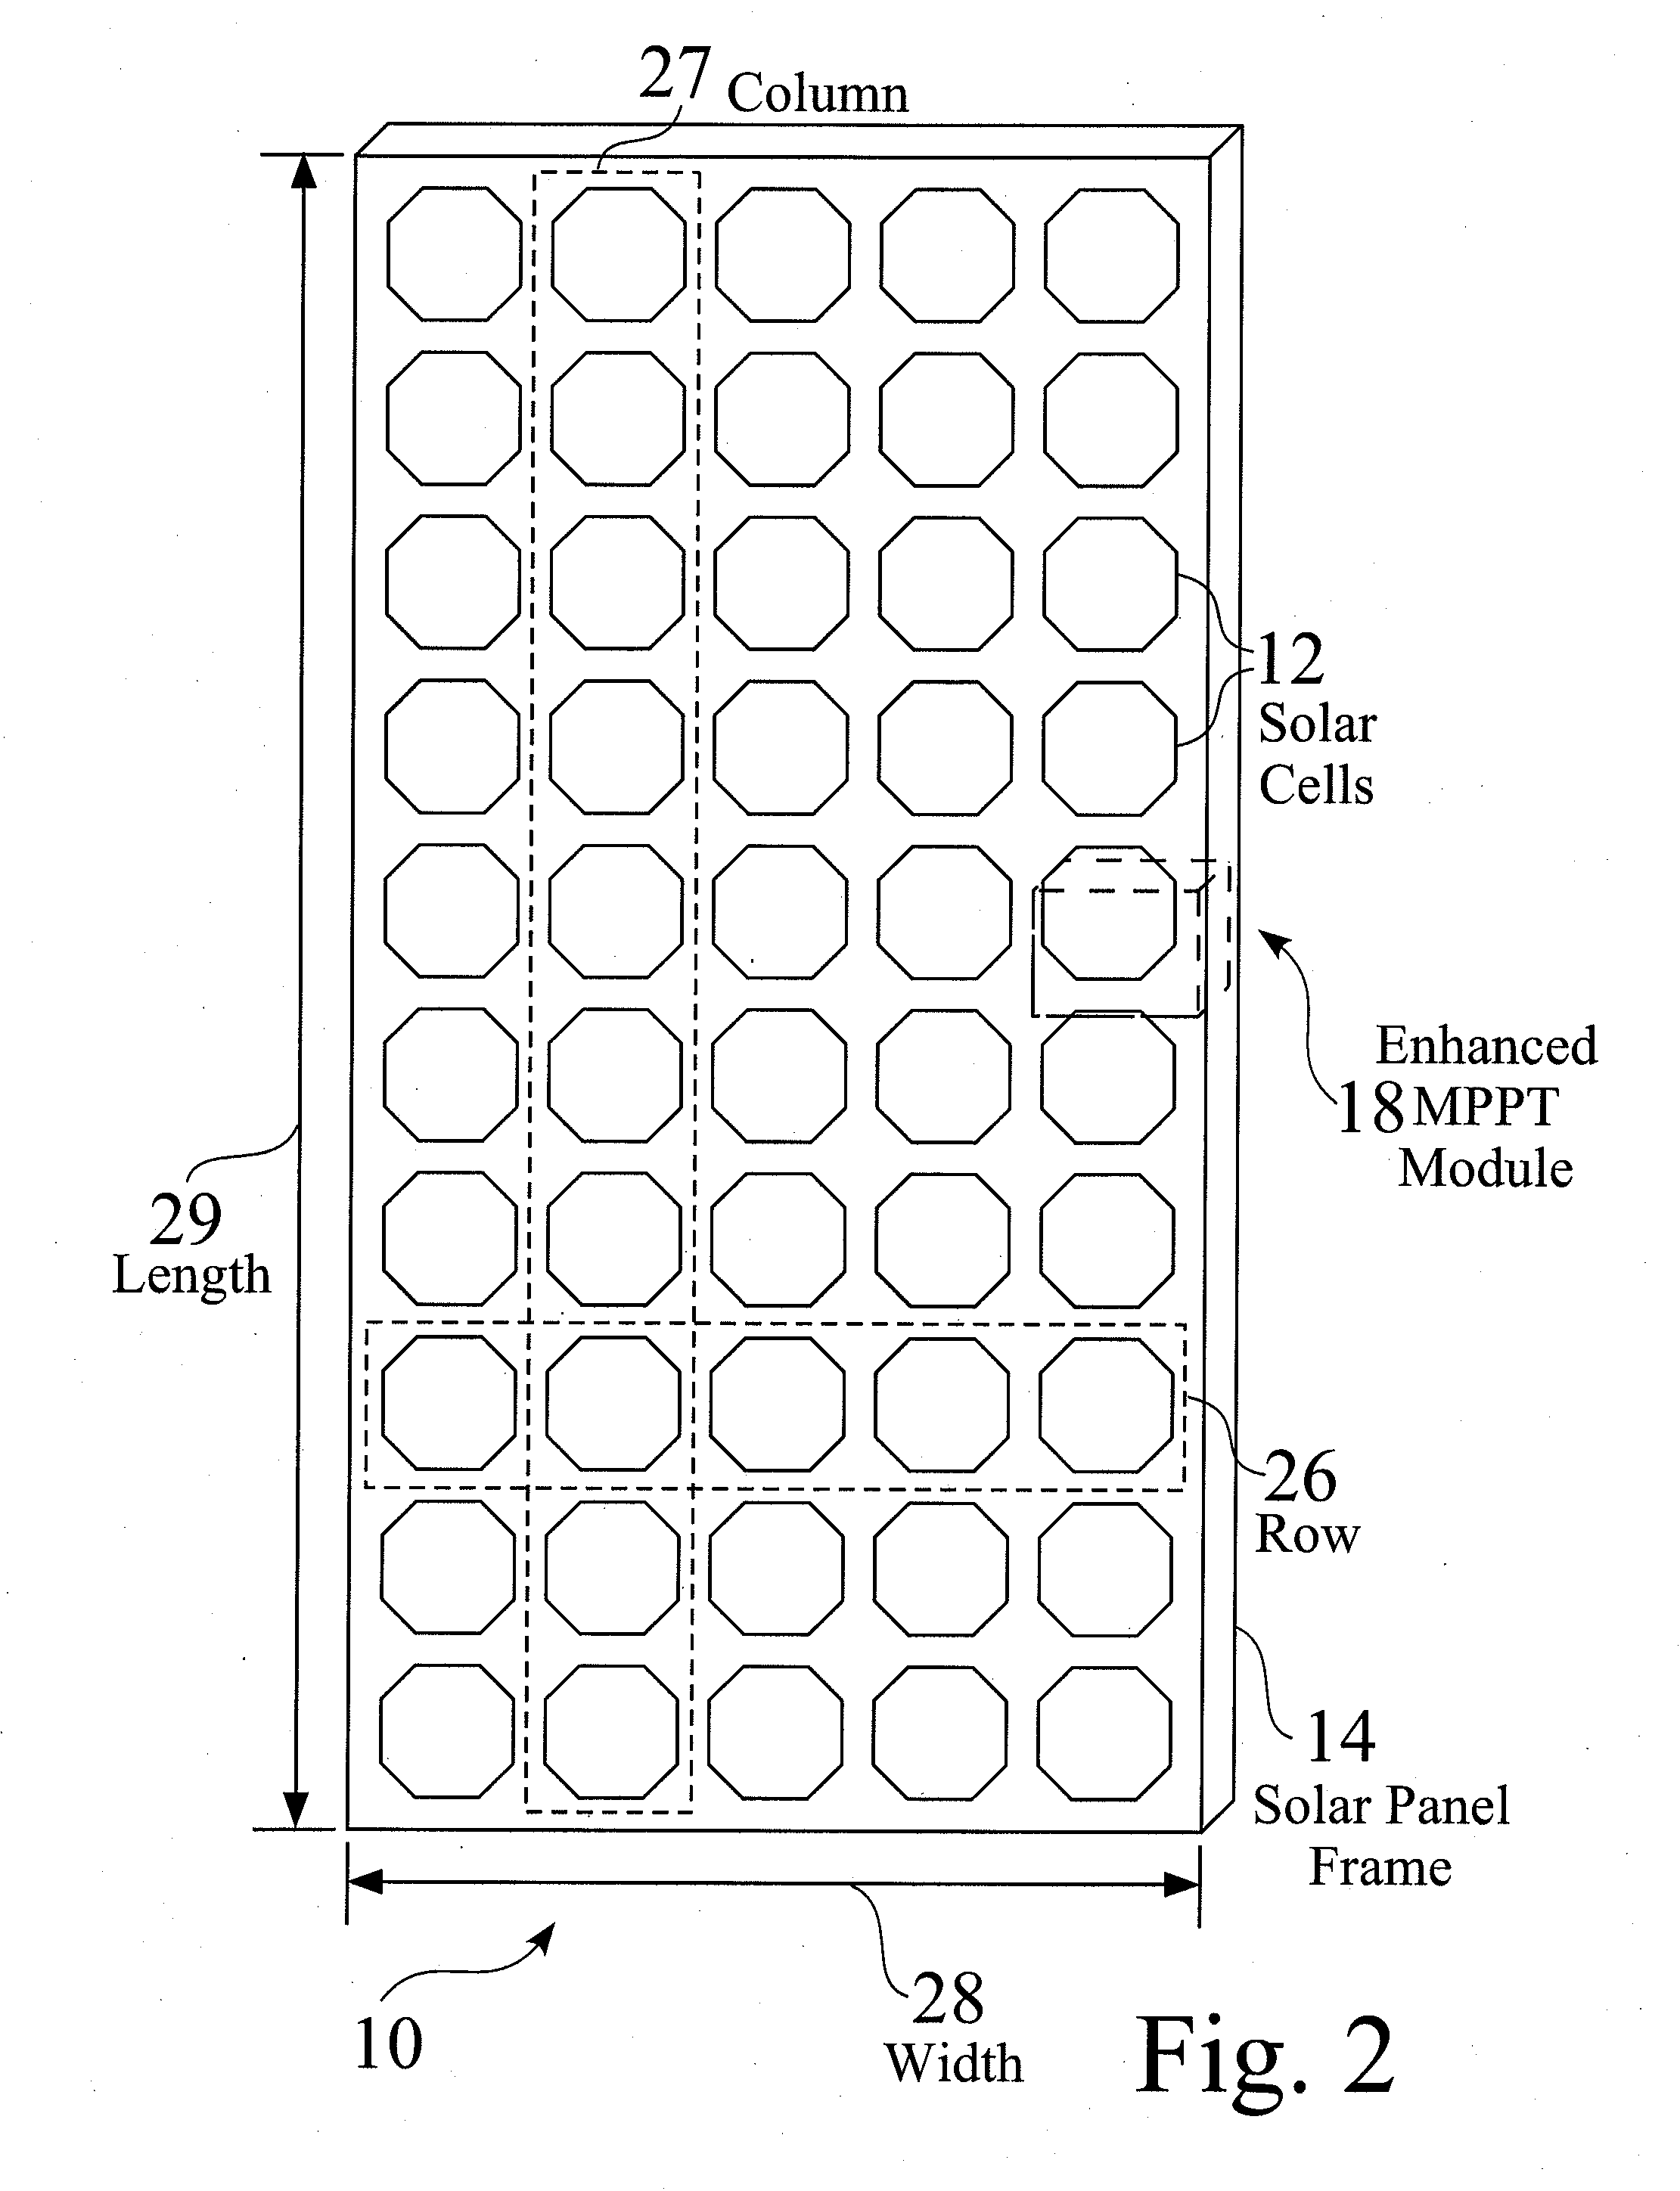 Distributed maximum power point tracking system, structure and process